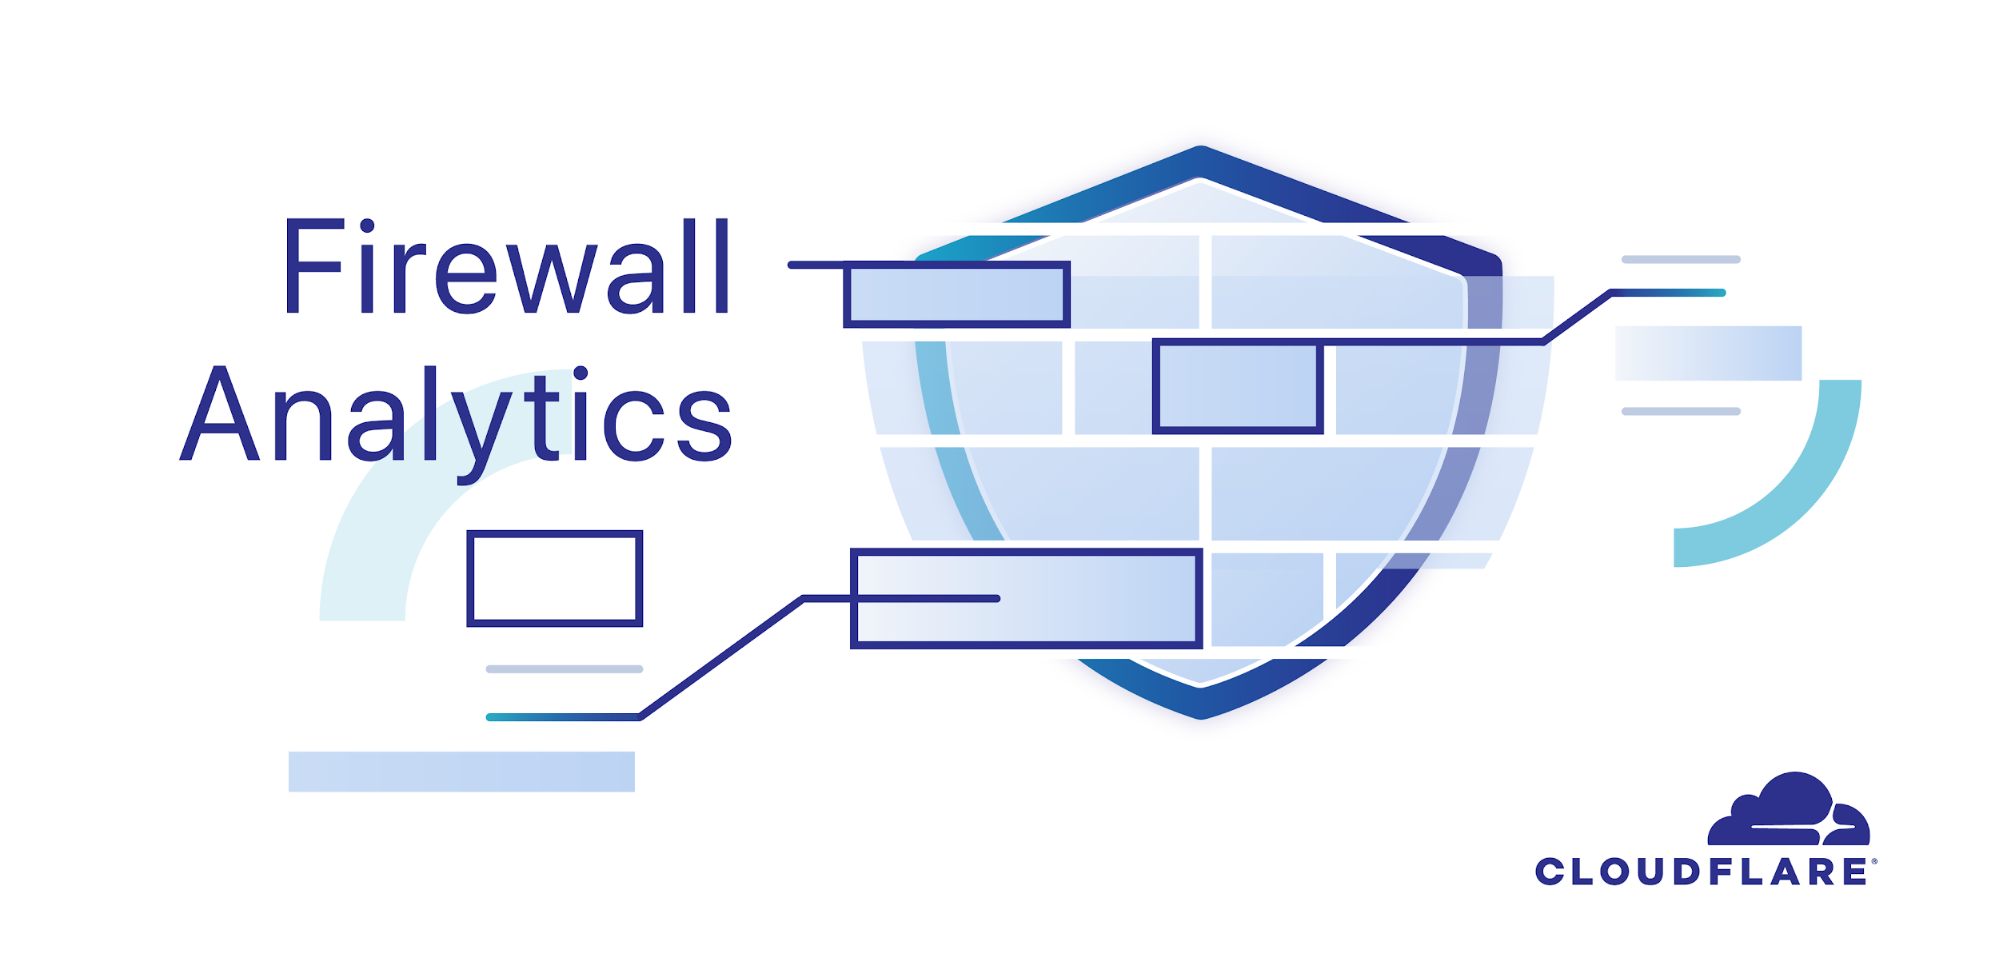 Firewall Analytics: Now available to all paid plans